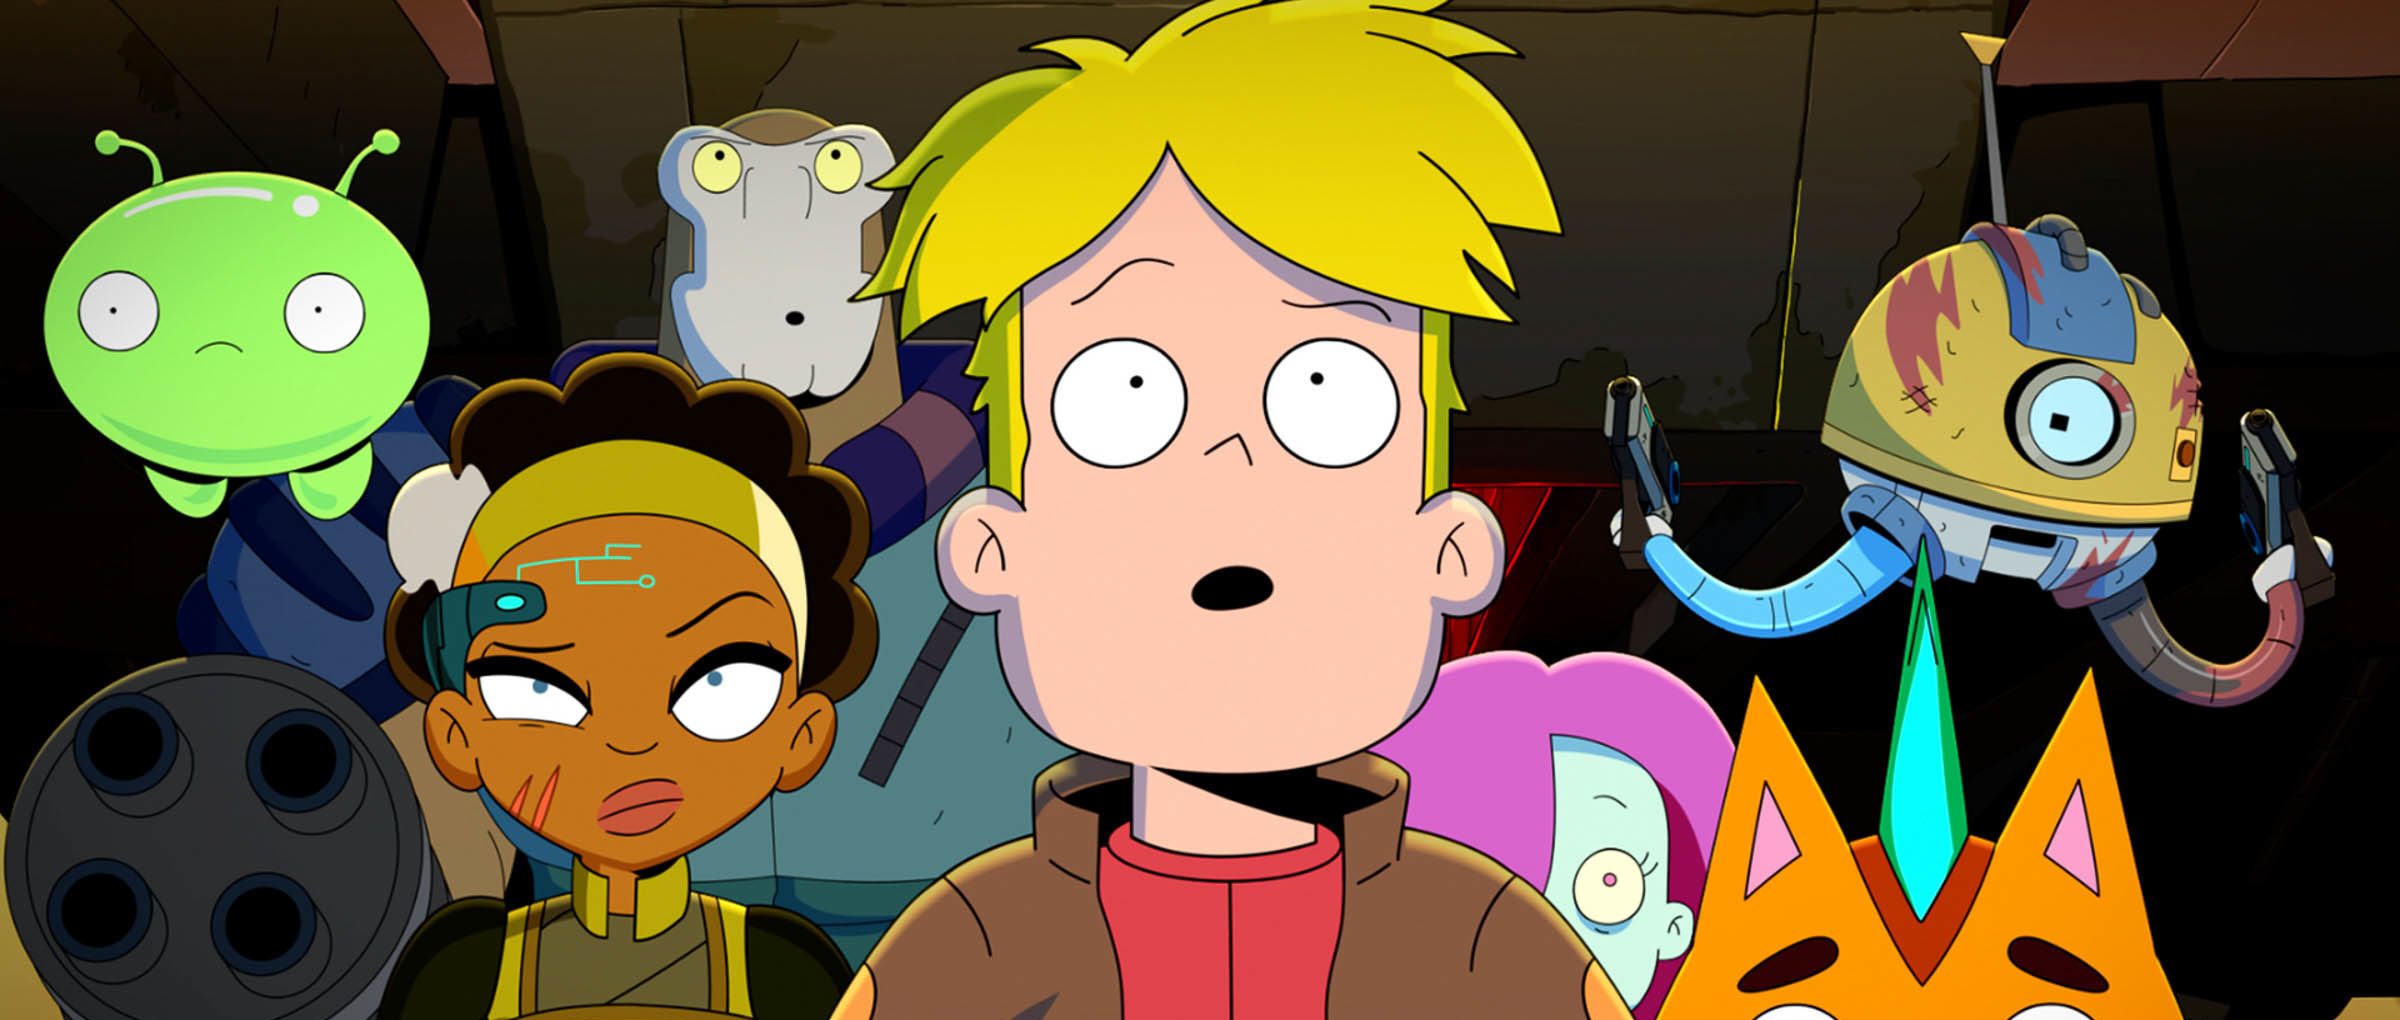 Final Space Season 3 Finale: What to Expect?